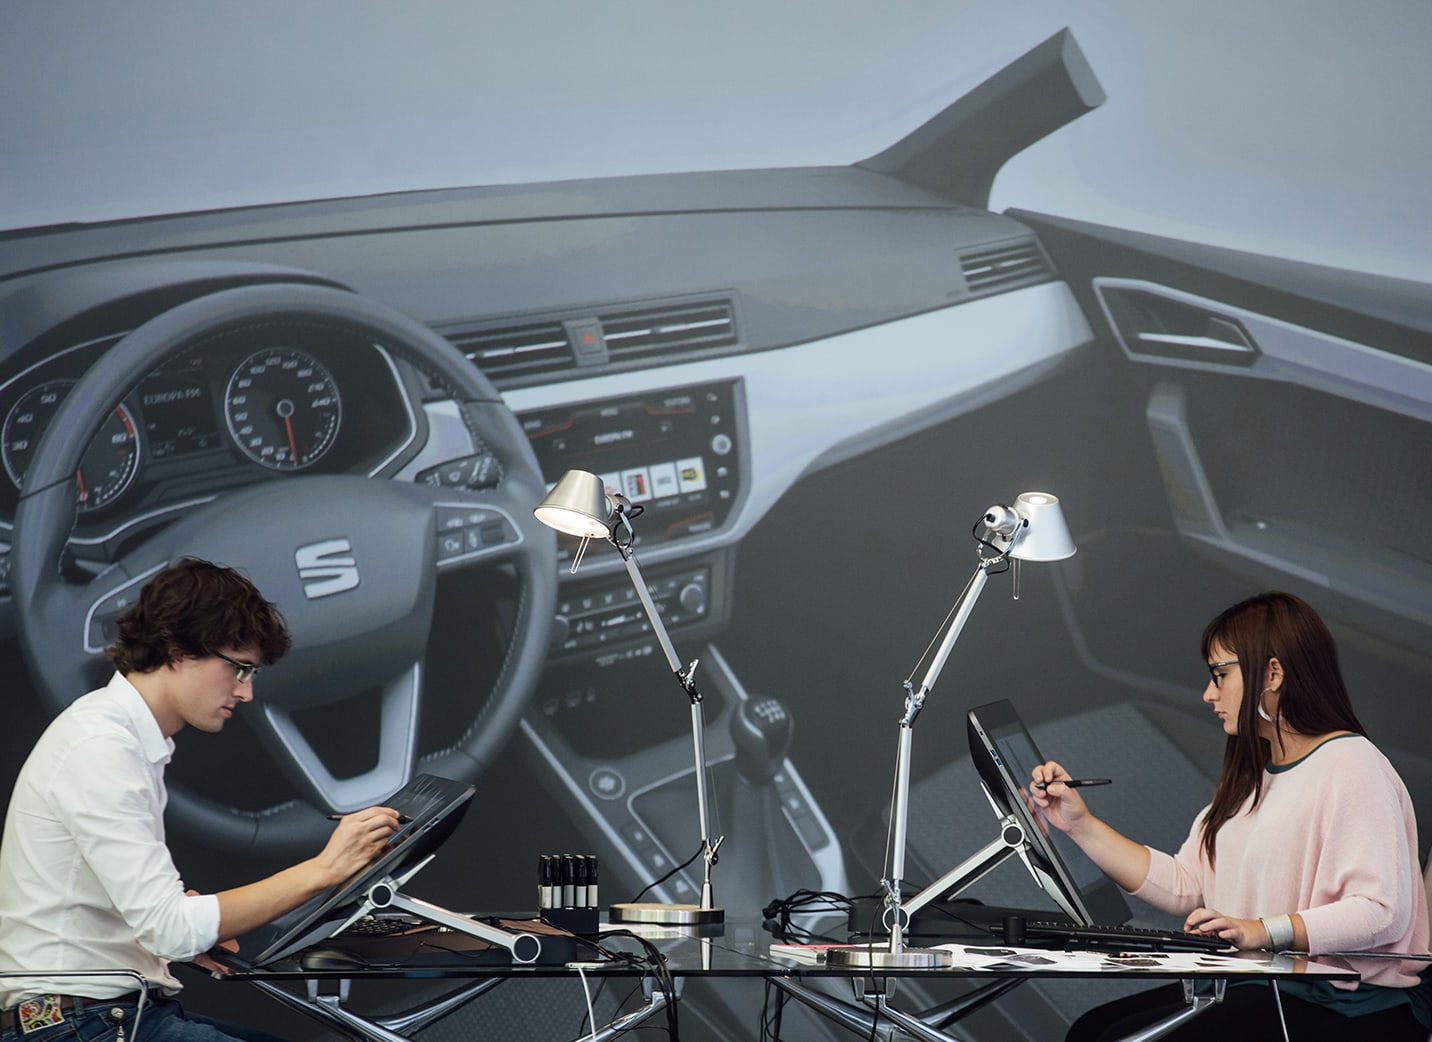 Two new car designers drawing on electronic display units with a photo backdrop of the interior of a car – SEAT Human Resources